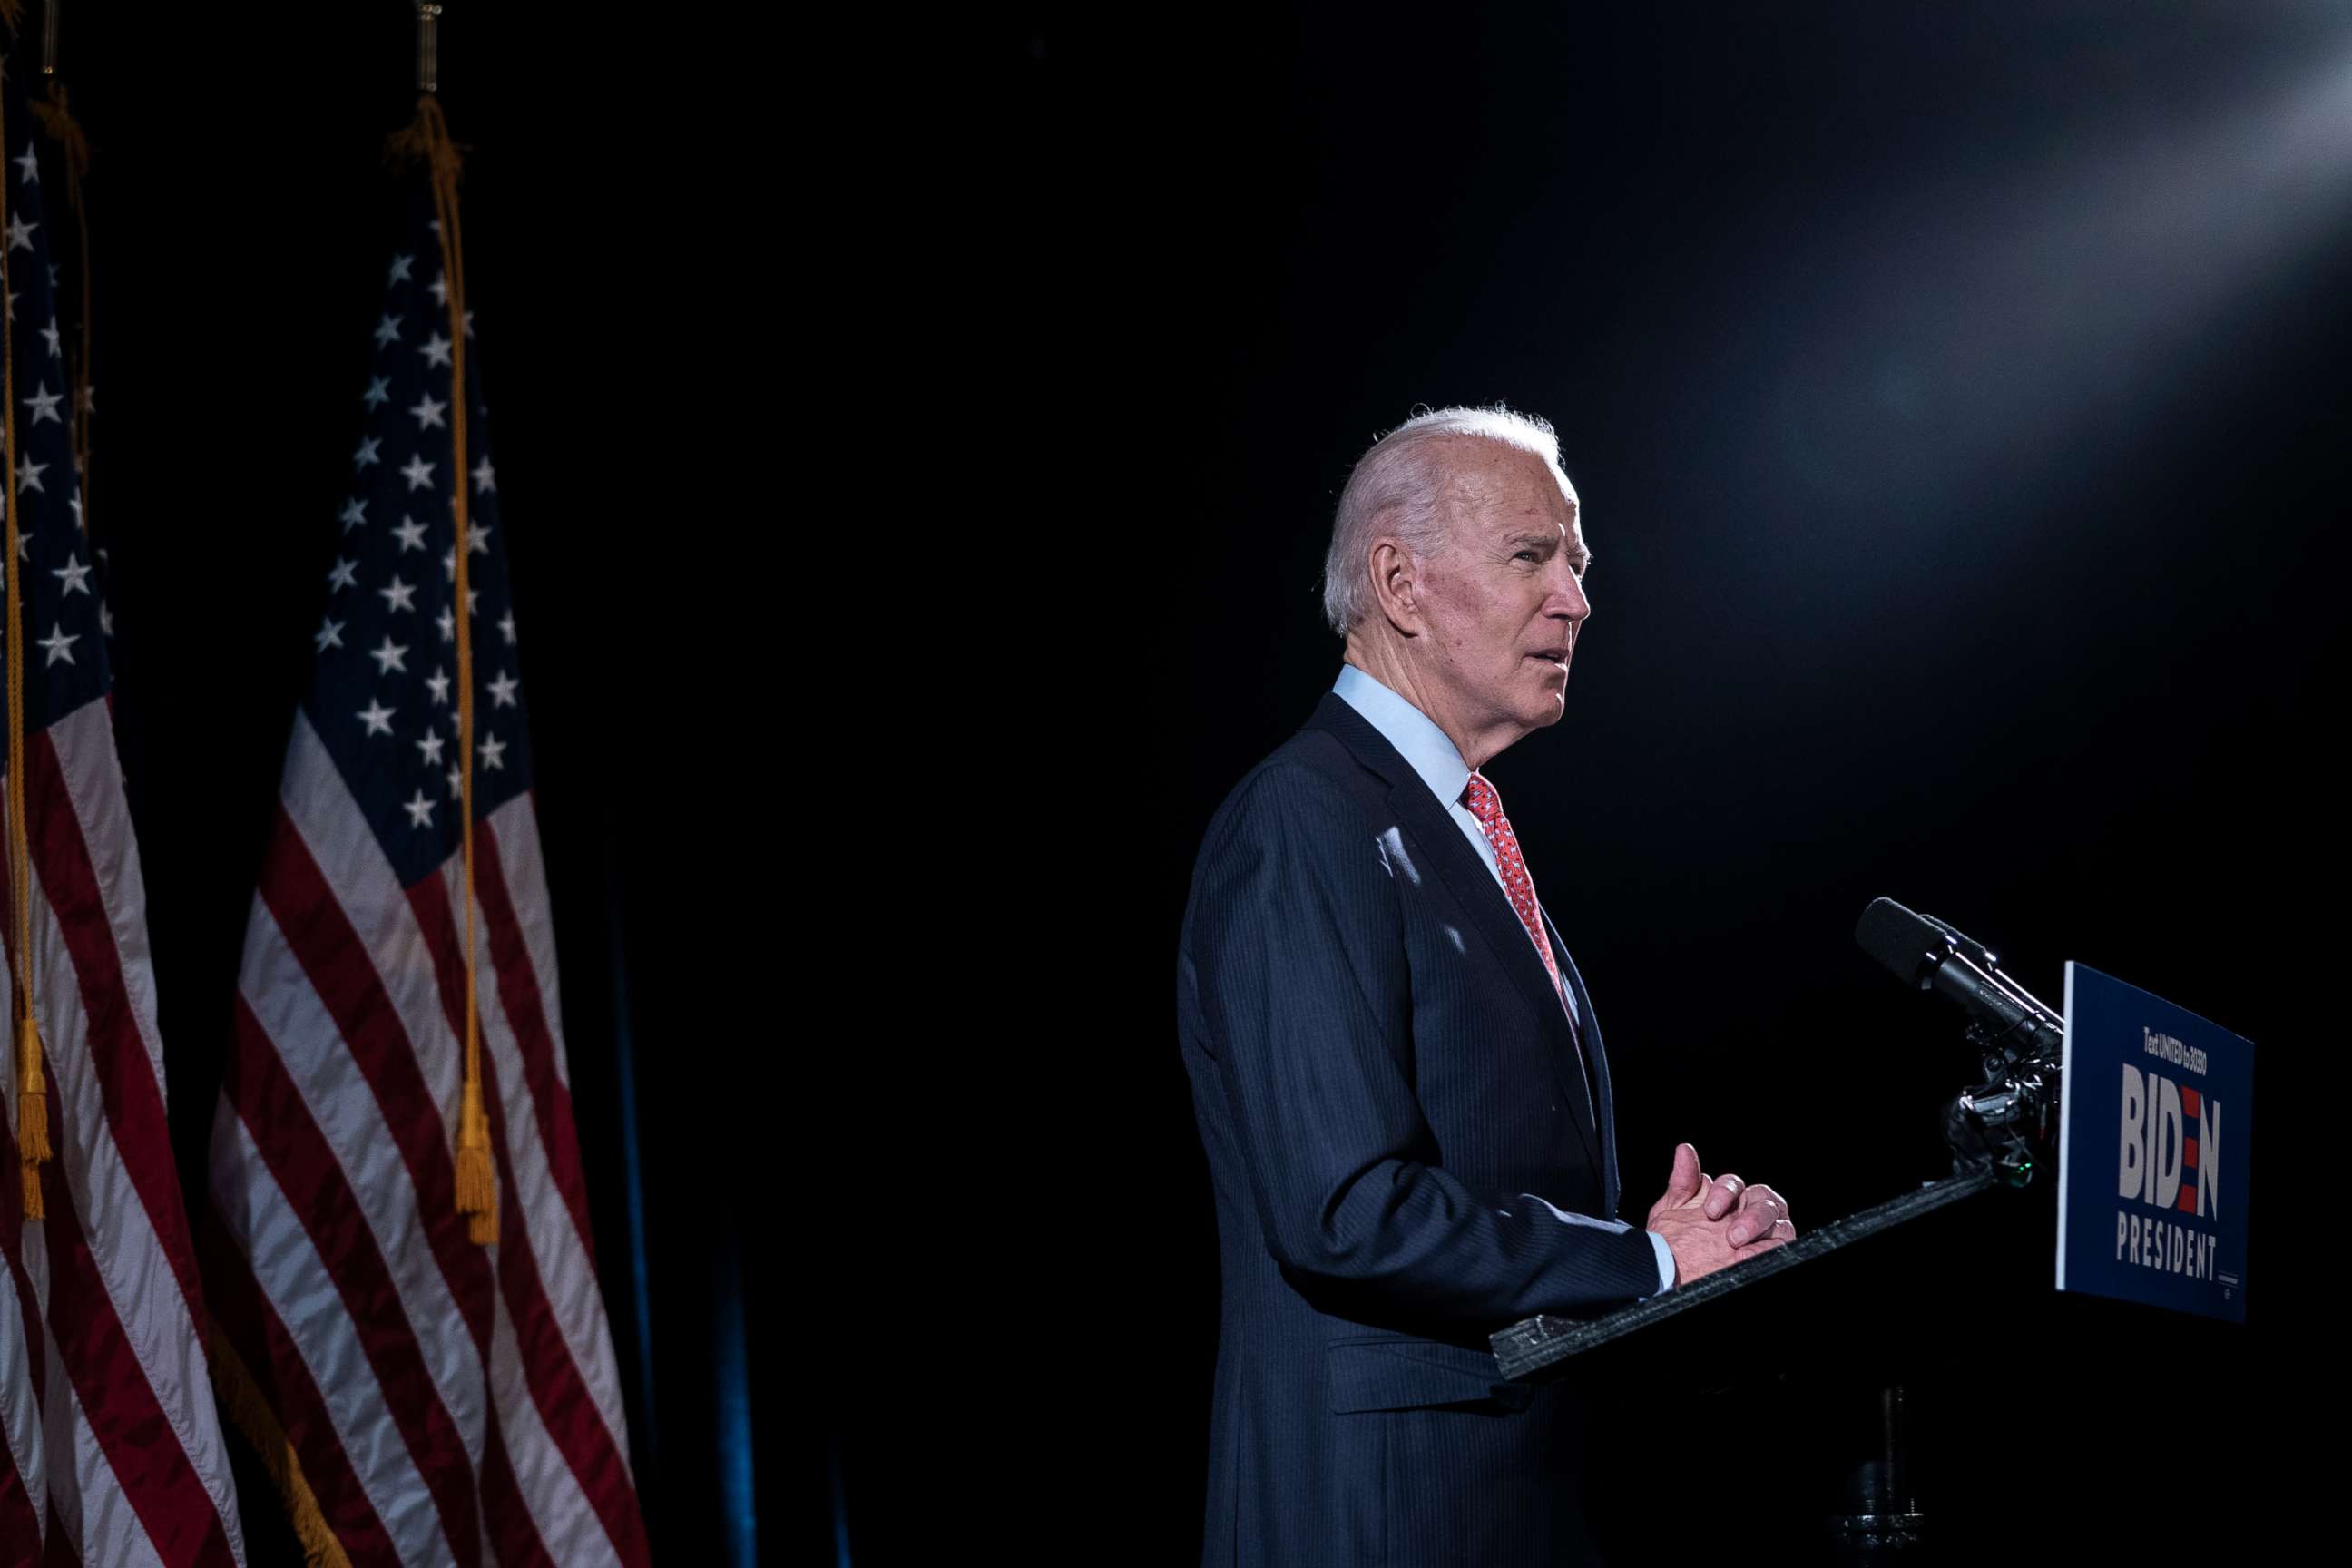 PHOTO: WILMINGTON, DE - MARCH 12: Democratic presidential candidate former Vice Democratic presidential candidate former Vice President Joe Biden delivers remarks about the coronavirus outbreak, at the Hotel Du Pont March 12, 2020 in Wilmington, Delaware.